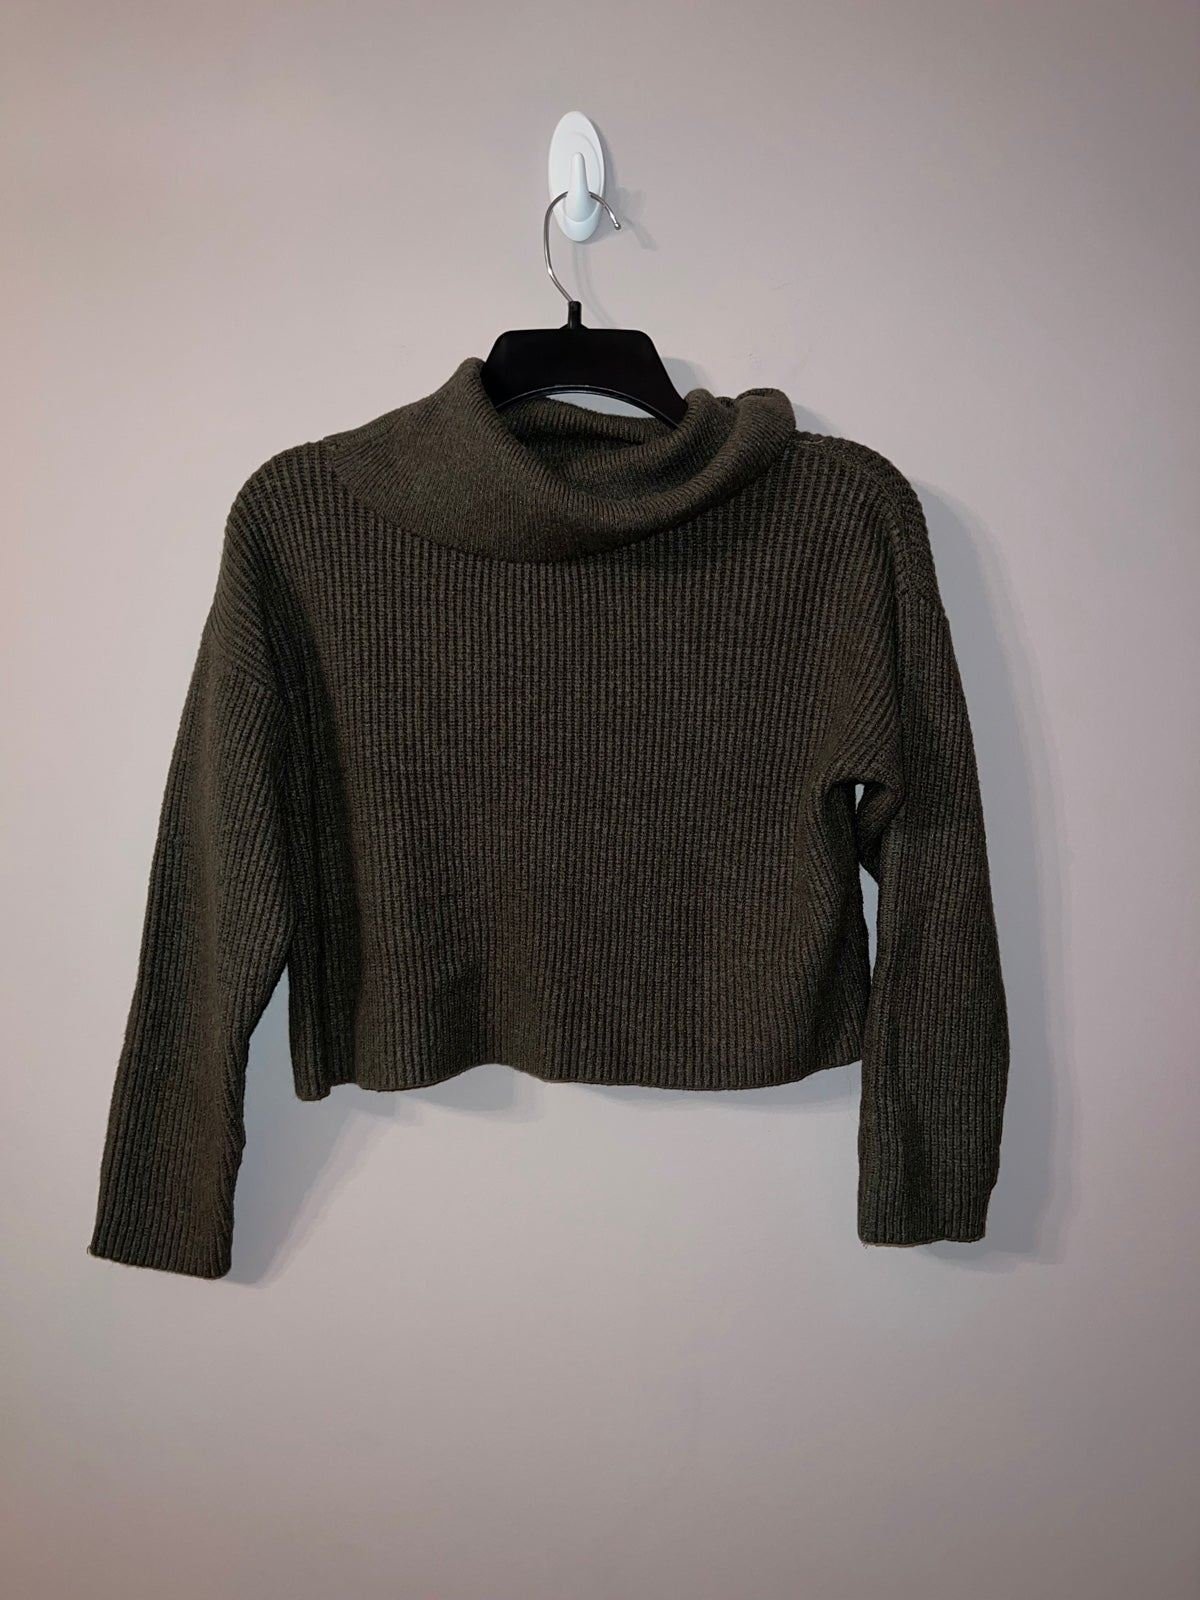 Olive green dark green turtleneck crop top proof apparel size small ribbed kMc7NkHd8